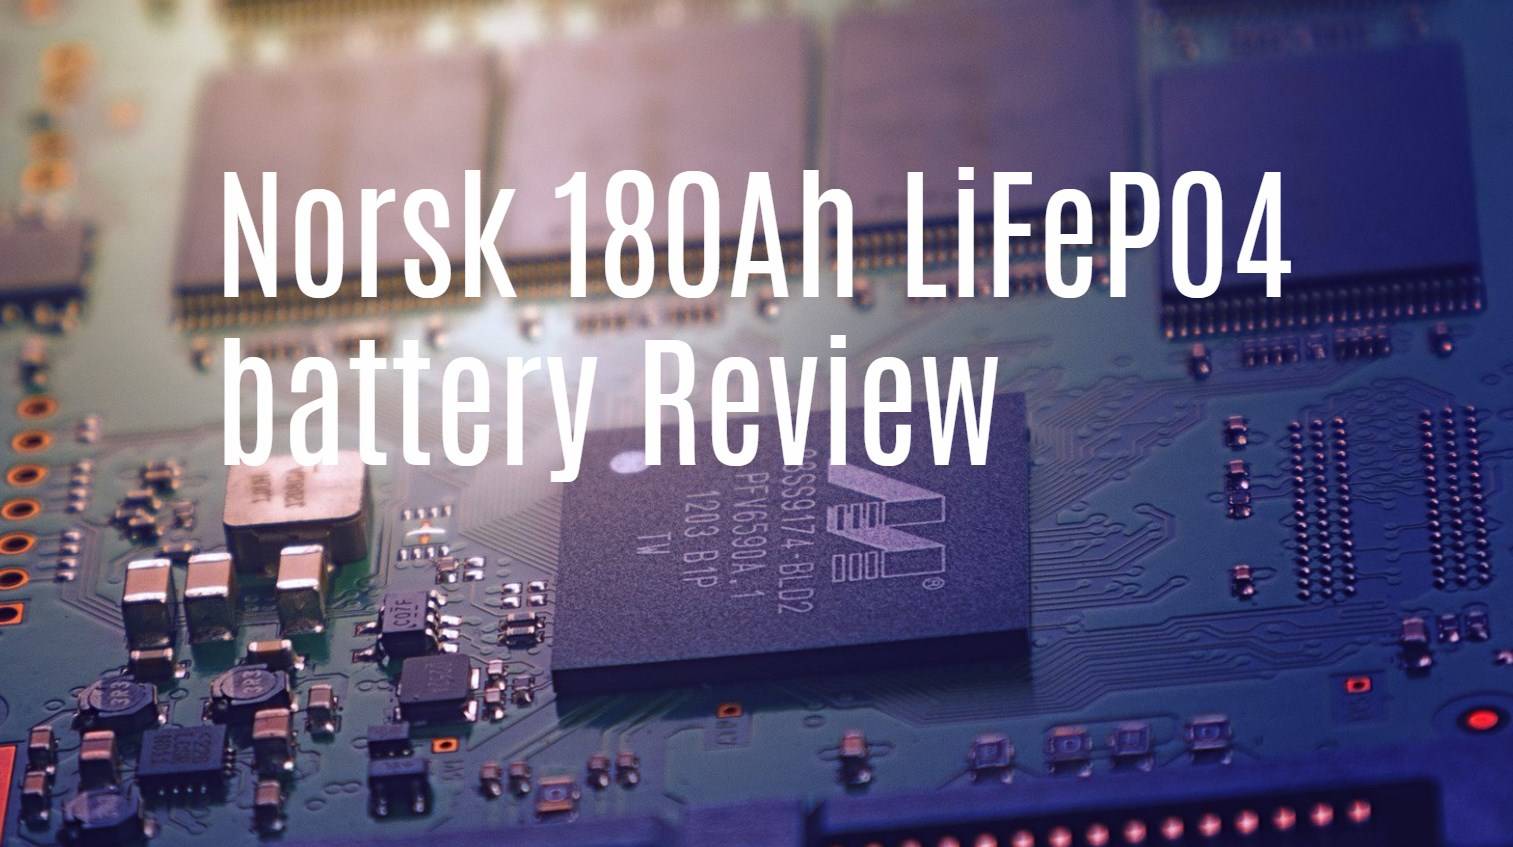 Norsk 180Ah LiFePO4 battery Review